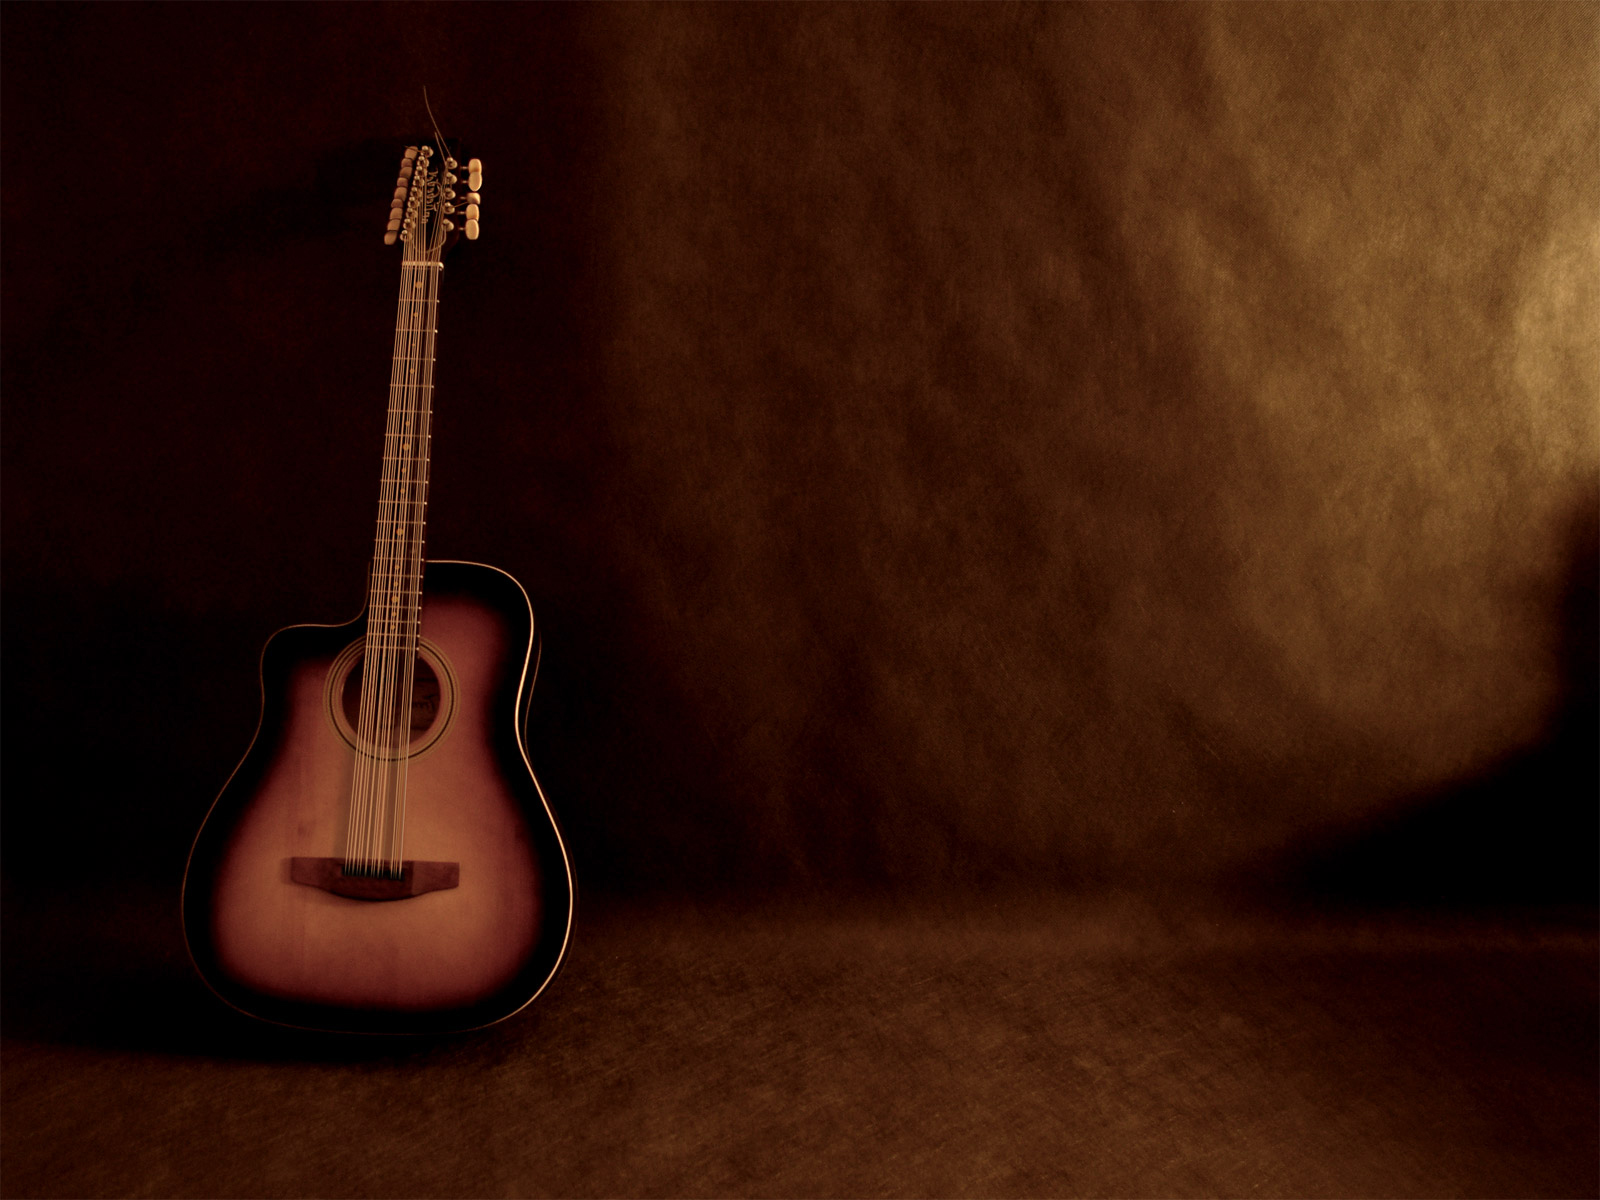 Acoustic Guitar Background Free - Guitar Background Photo Download -  1600x1200 Wallpaper 